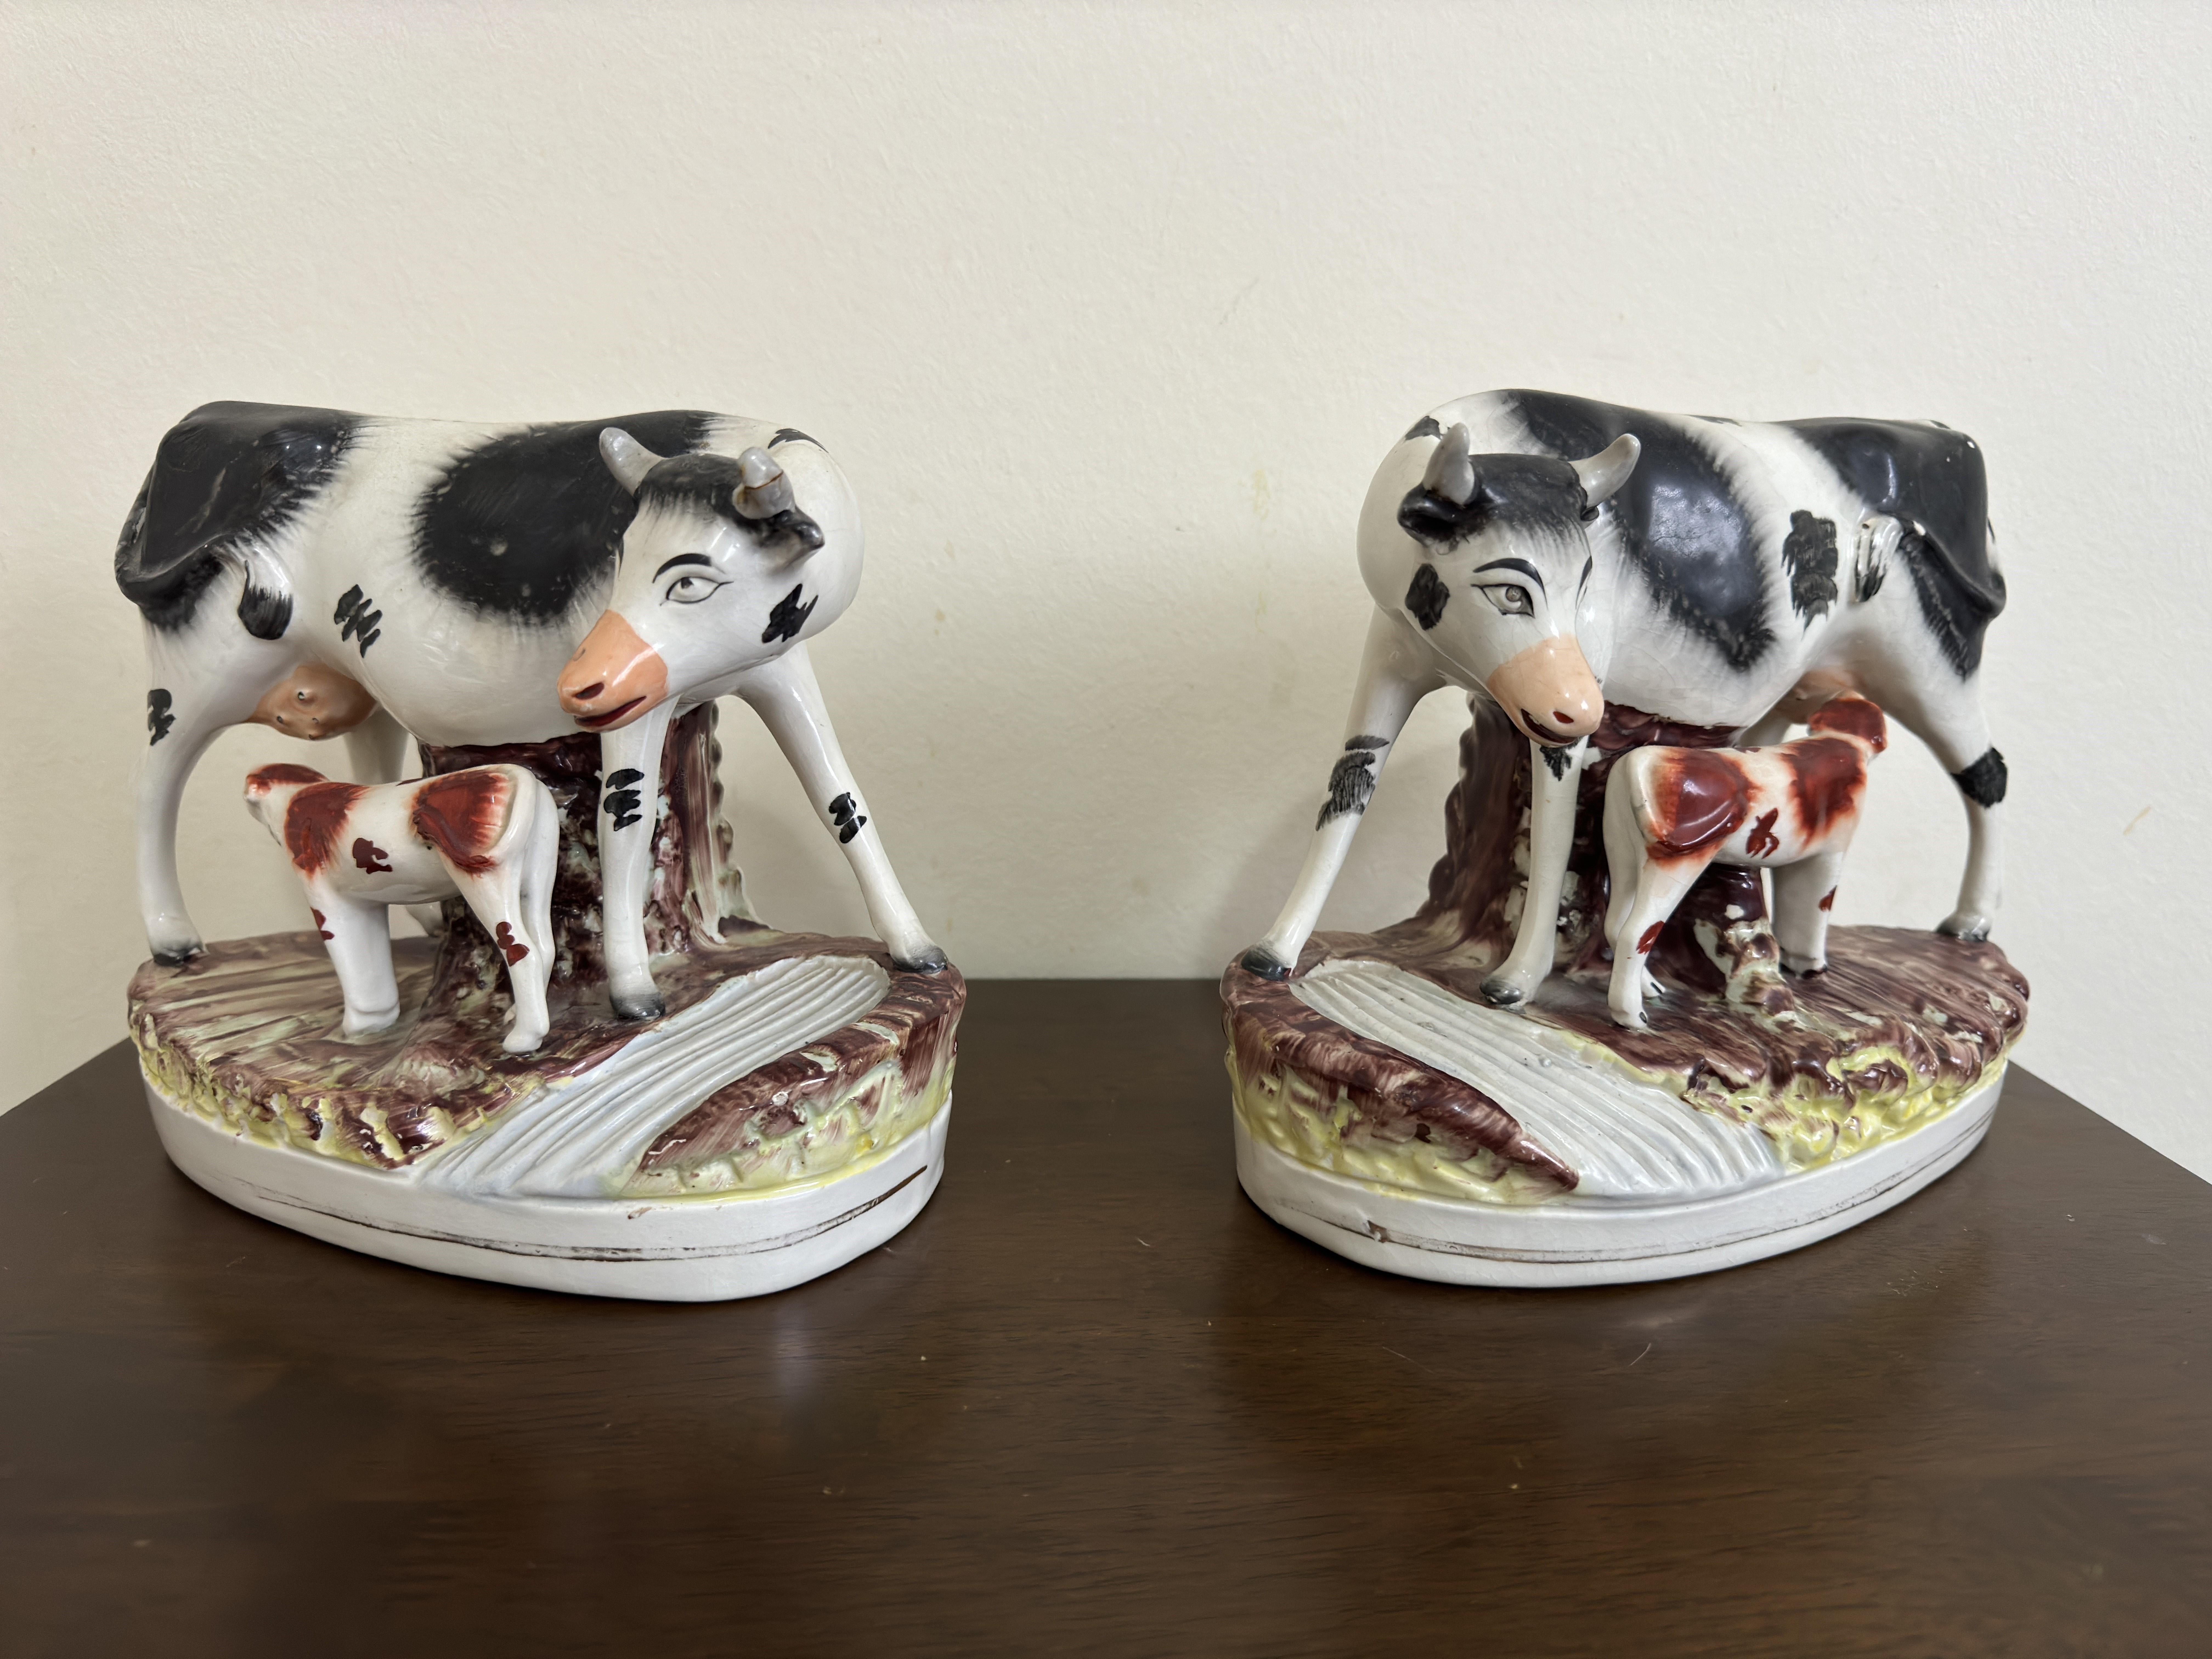 A rare pair of 19th Century Staffordshire cows with their feeding calves, nicely coloured ceramic enamels, made circa 1880.

24 cm (9 inches) long, 20 cm (7.5 inches) high, 12 cm (4.5 inches) depth